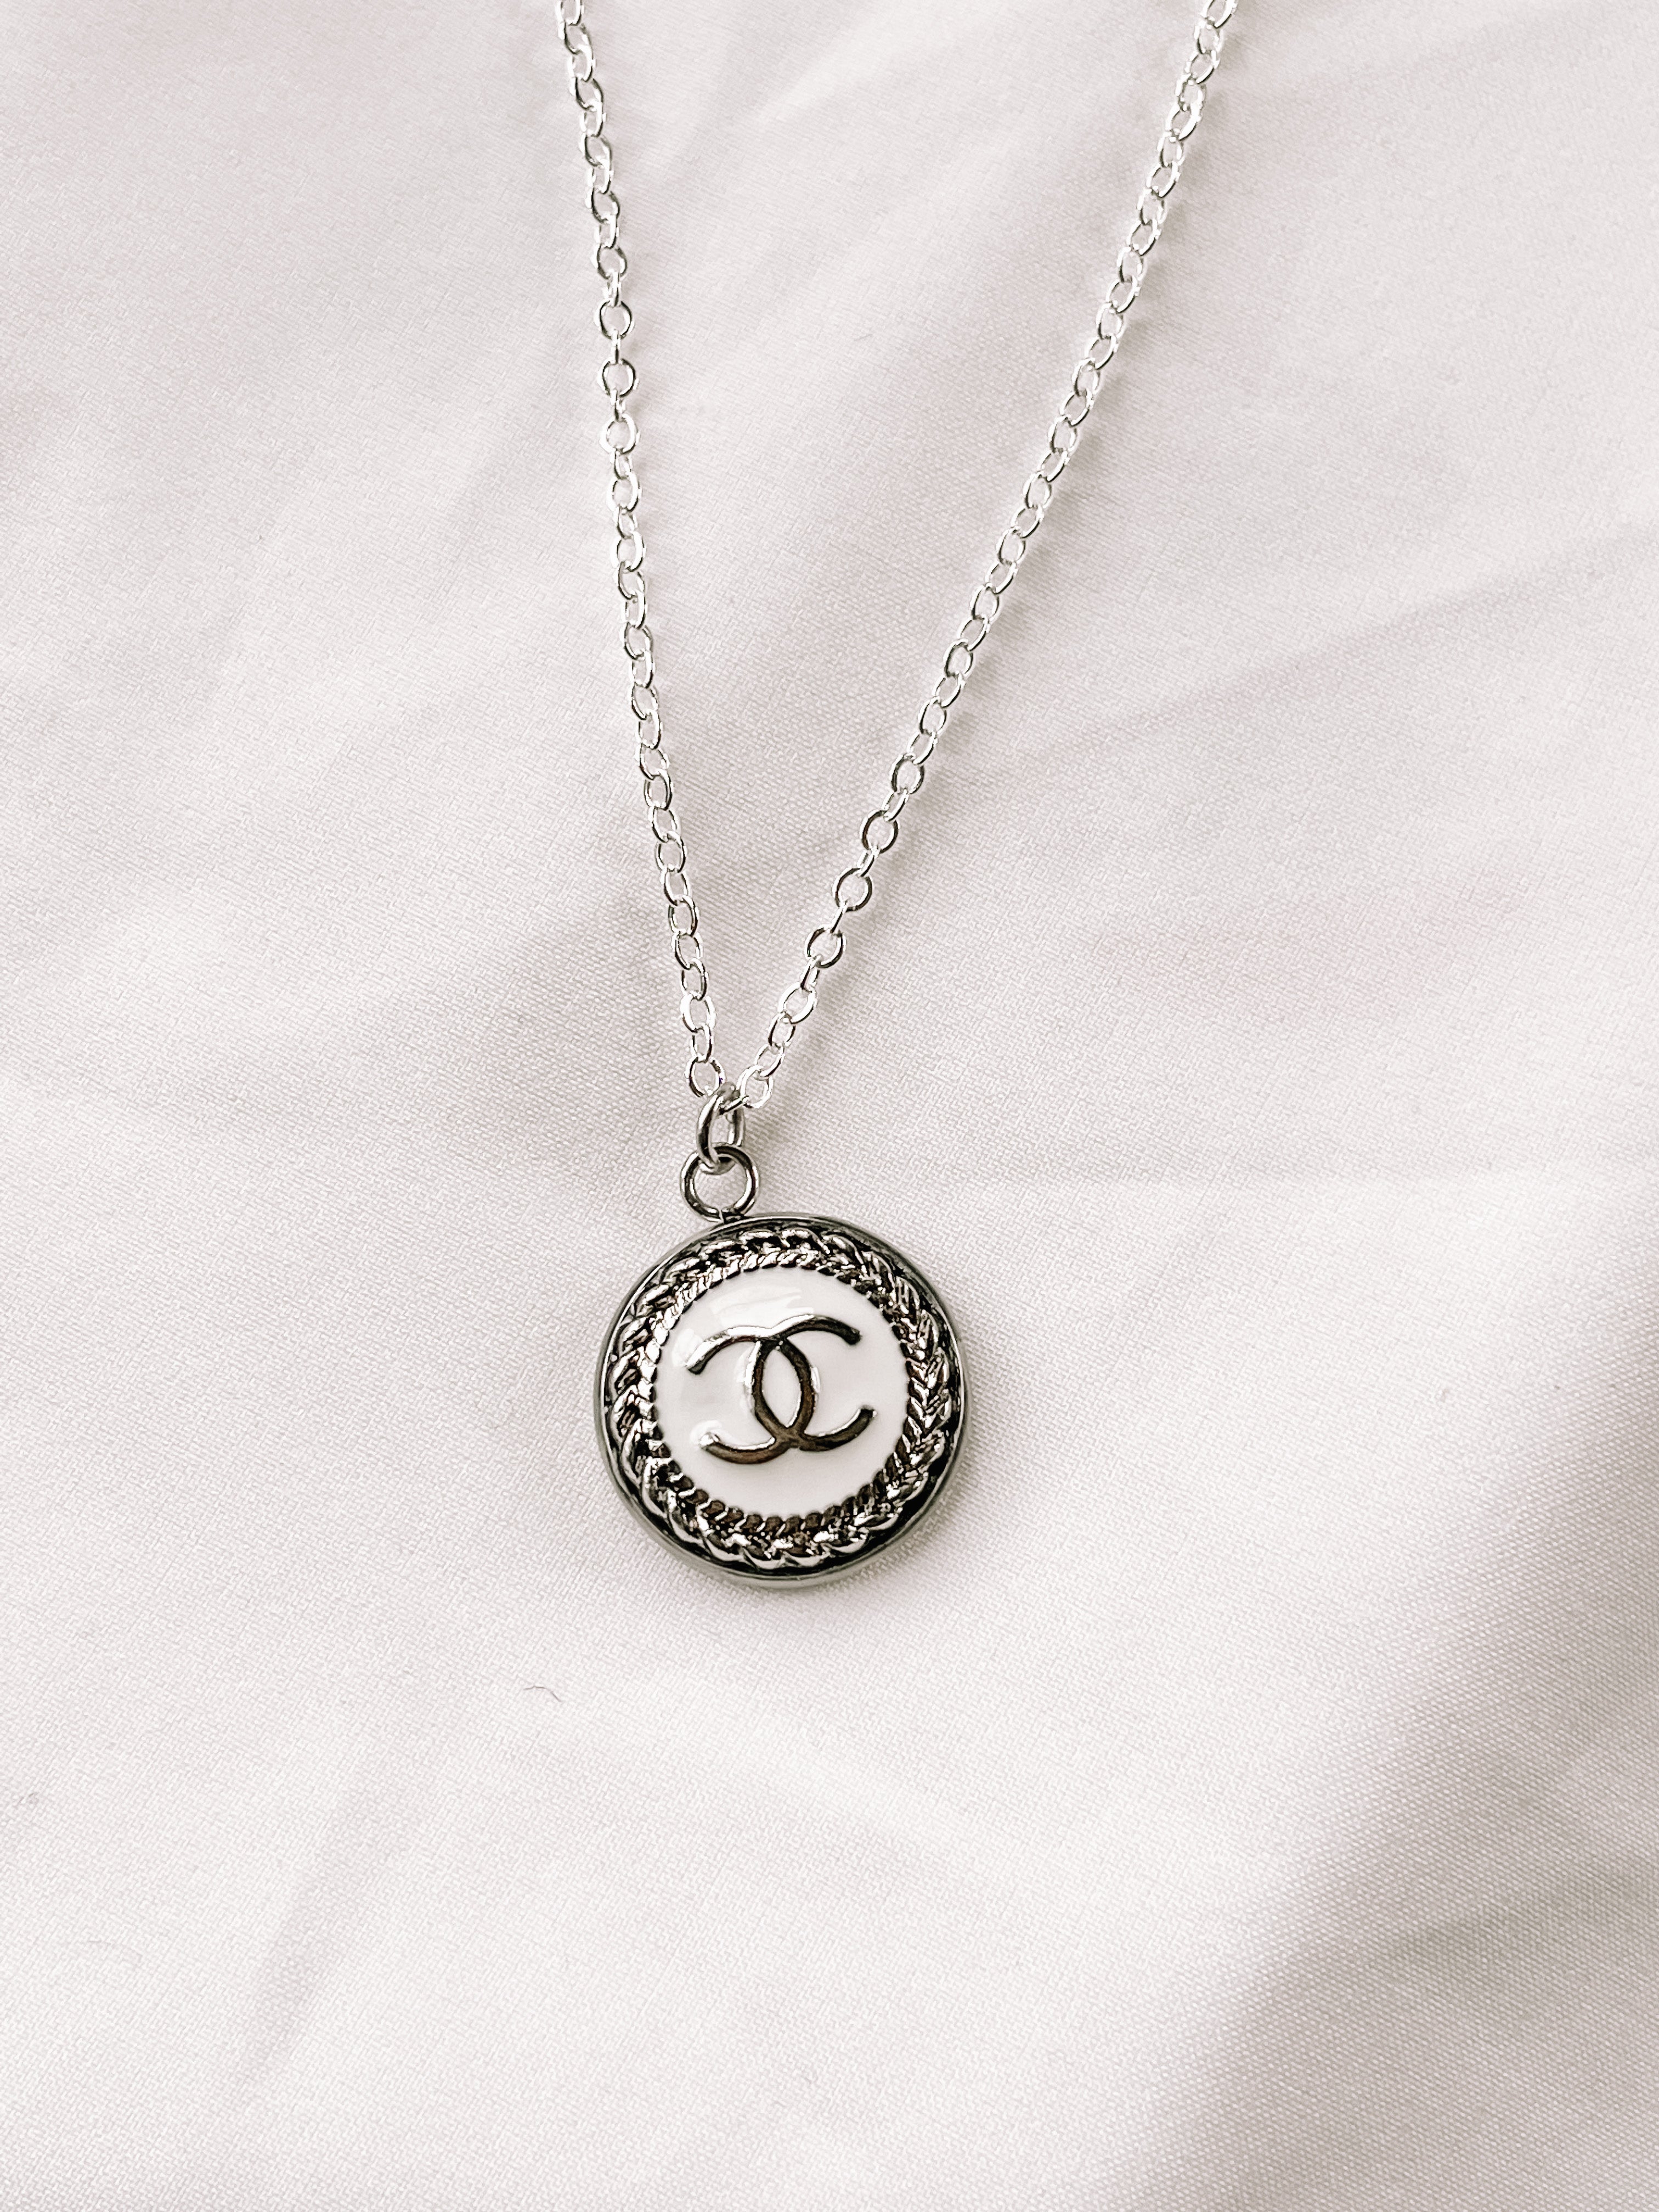 Authenticated Used Chanel necklace pendant CHANEL here mark CC rhinestone  silver white  Walmartcom